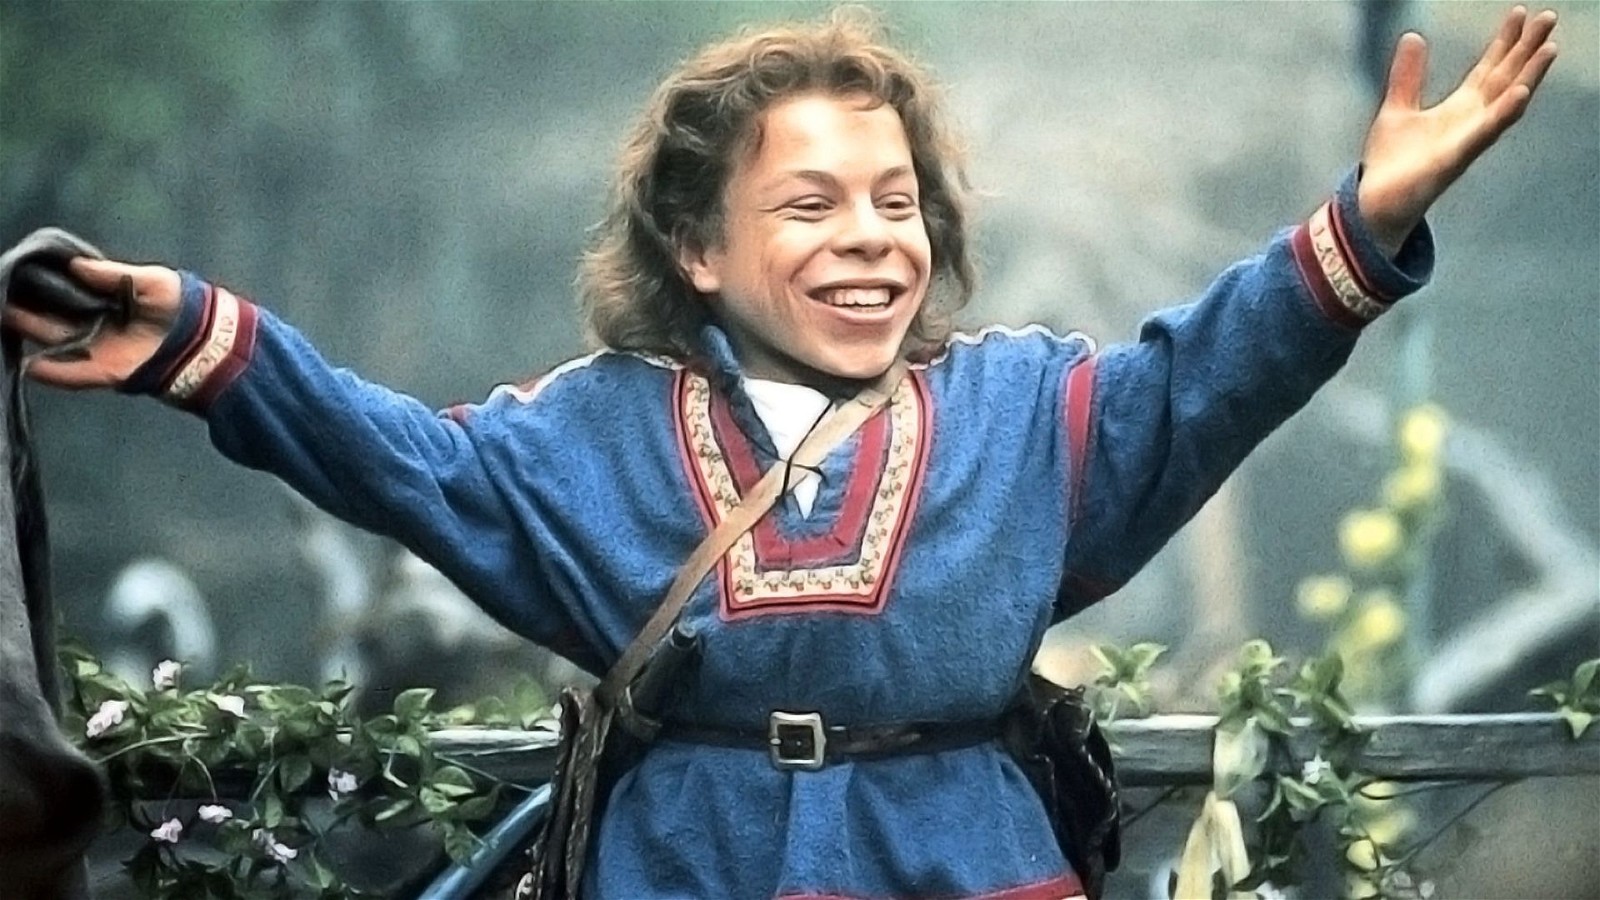 Warwick Davis in and as Willow.